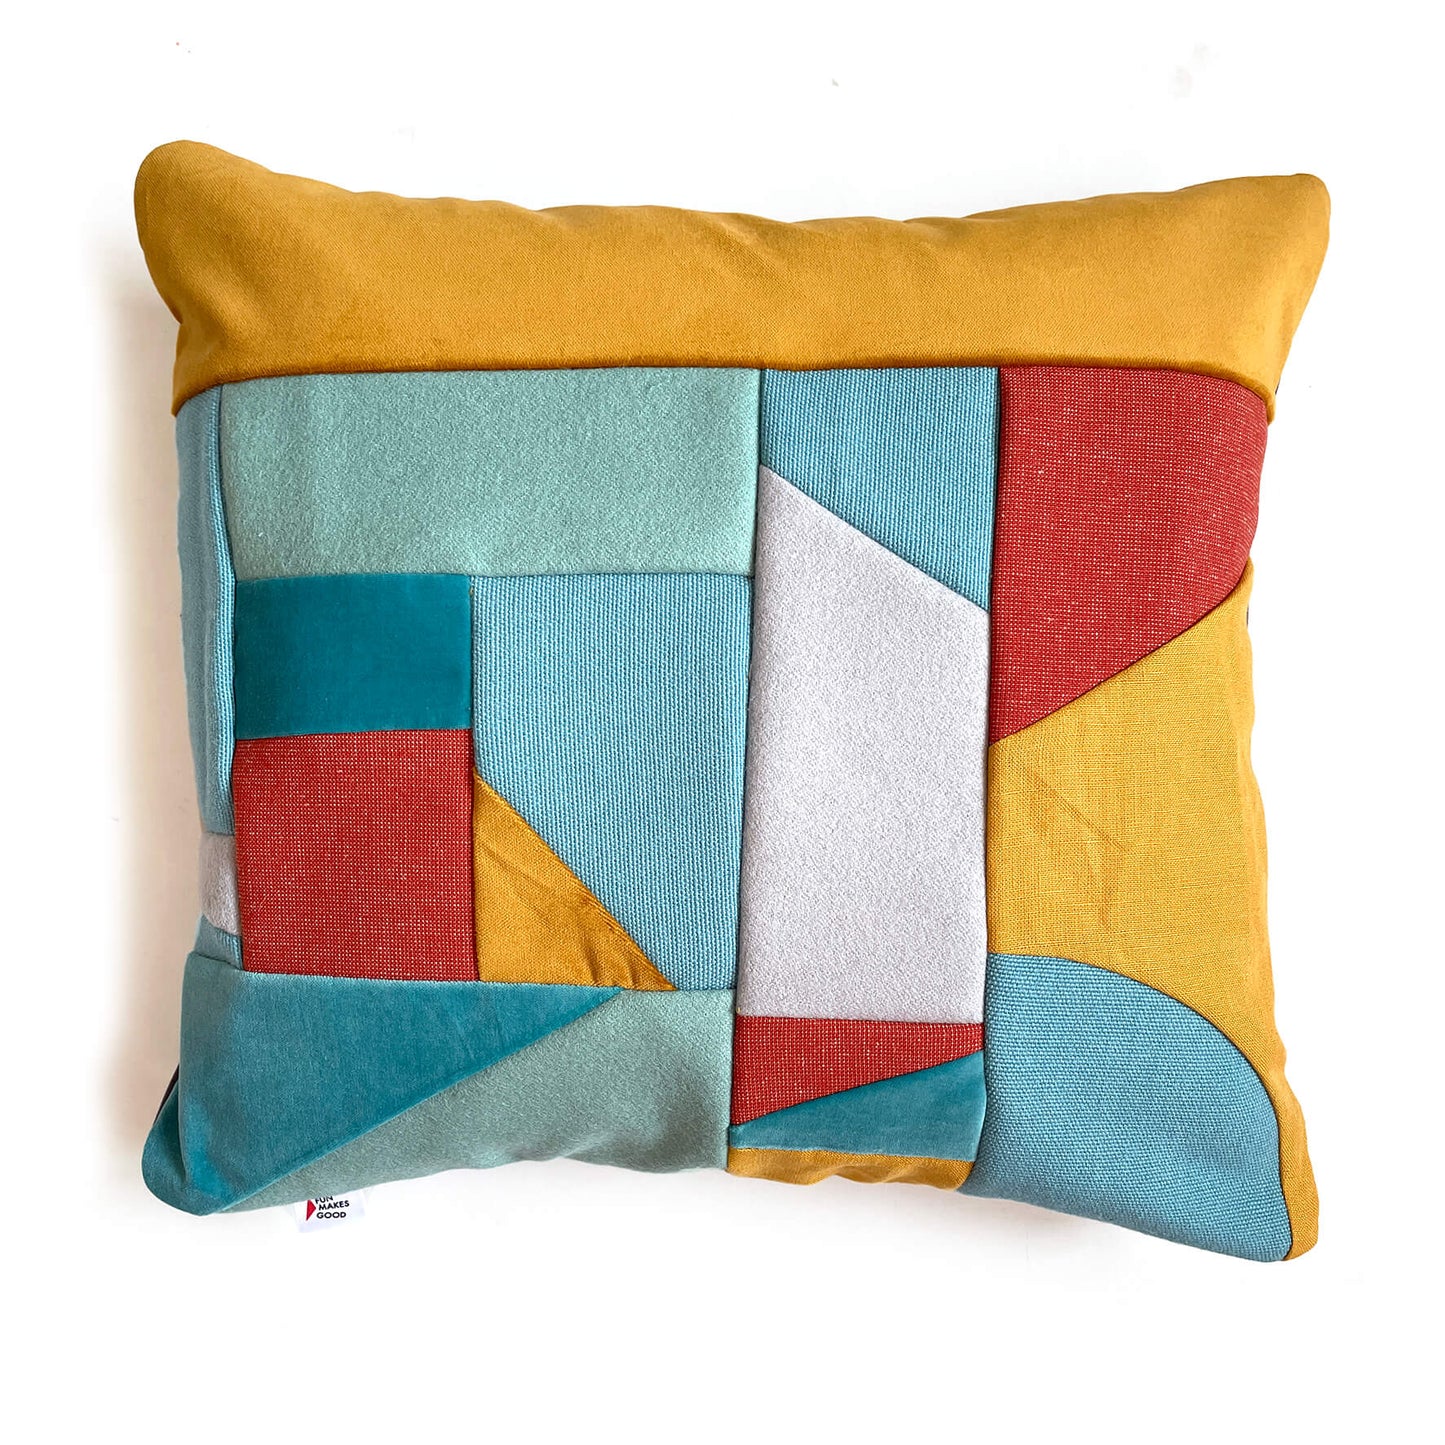 Fun Makes Good Cushion Blues and Greys and Pinks Collage Cushion